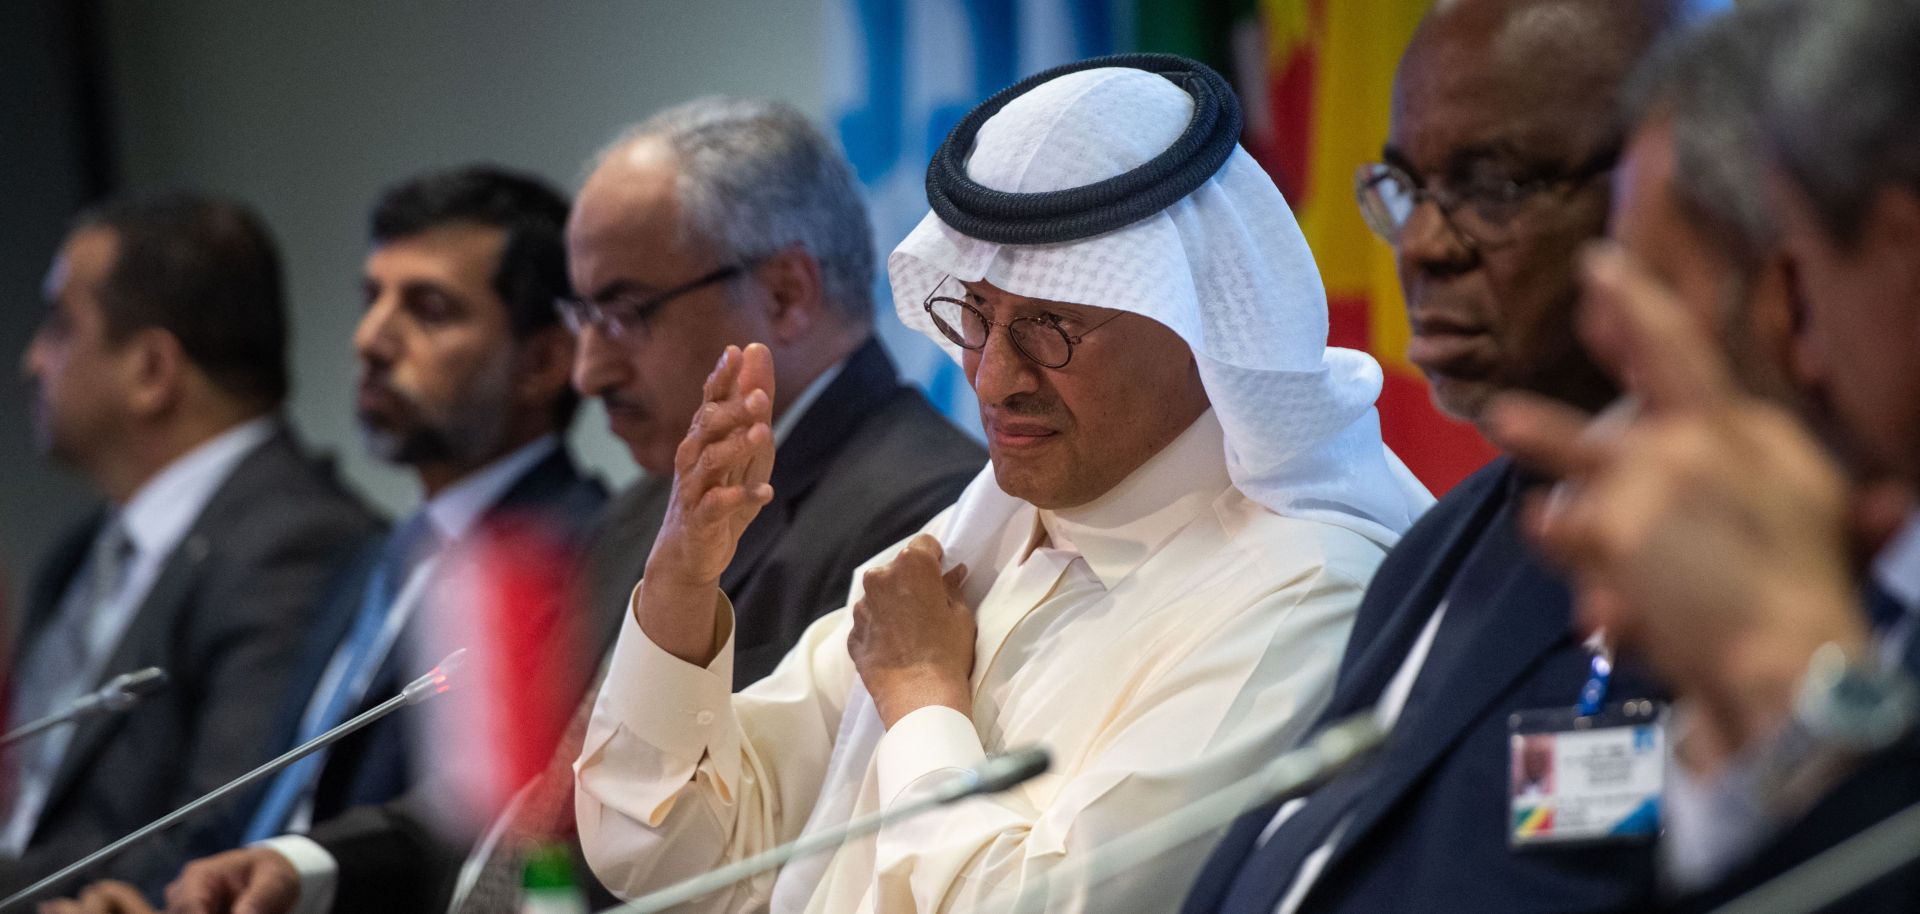 Saudi Arabia's Energy Minister Abdulaziz bin Salman speaks during a press conference after the 45th Joint Ministerial Monitoring Committee and the 33rd OPEC and non-OPEC Ministerial Meeting in Vienna, Austria, on Oct. 5.